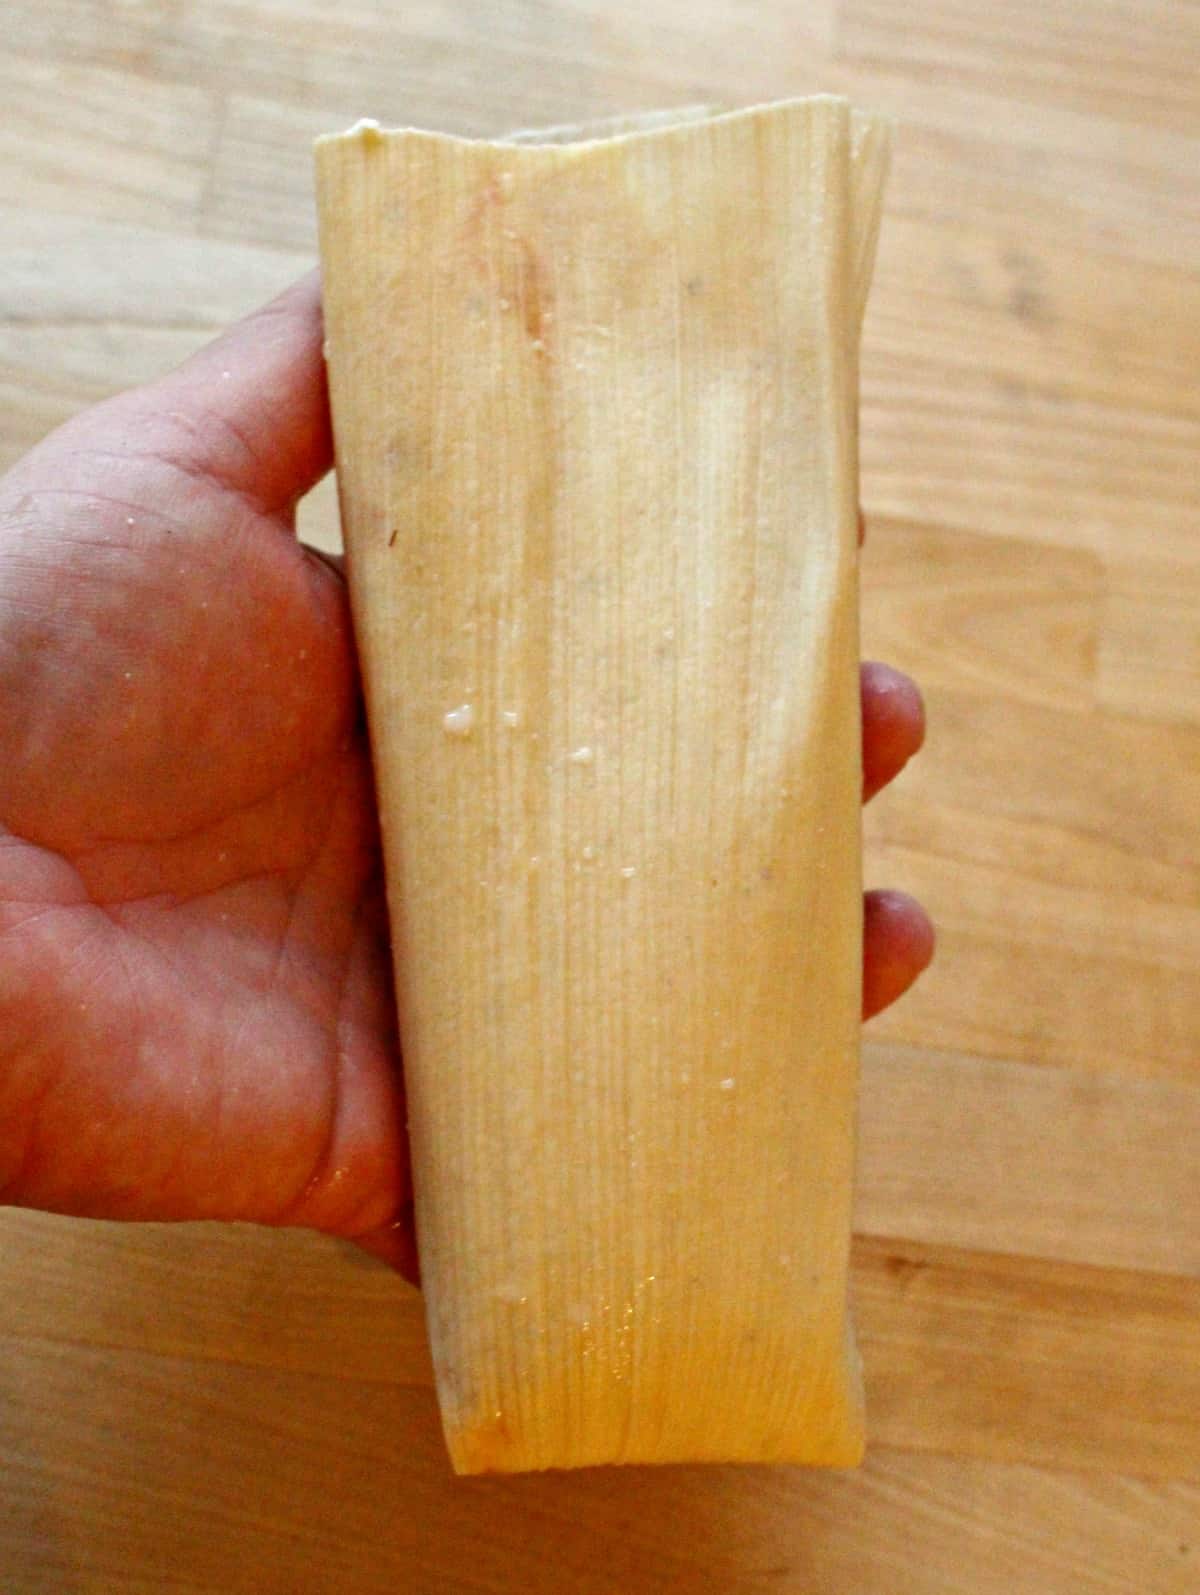 Hand holding an assembled but uncooked tamal.